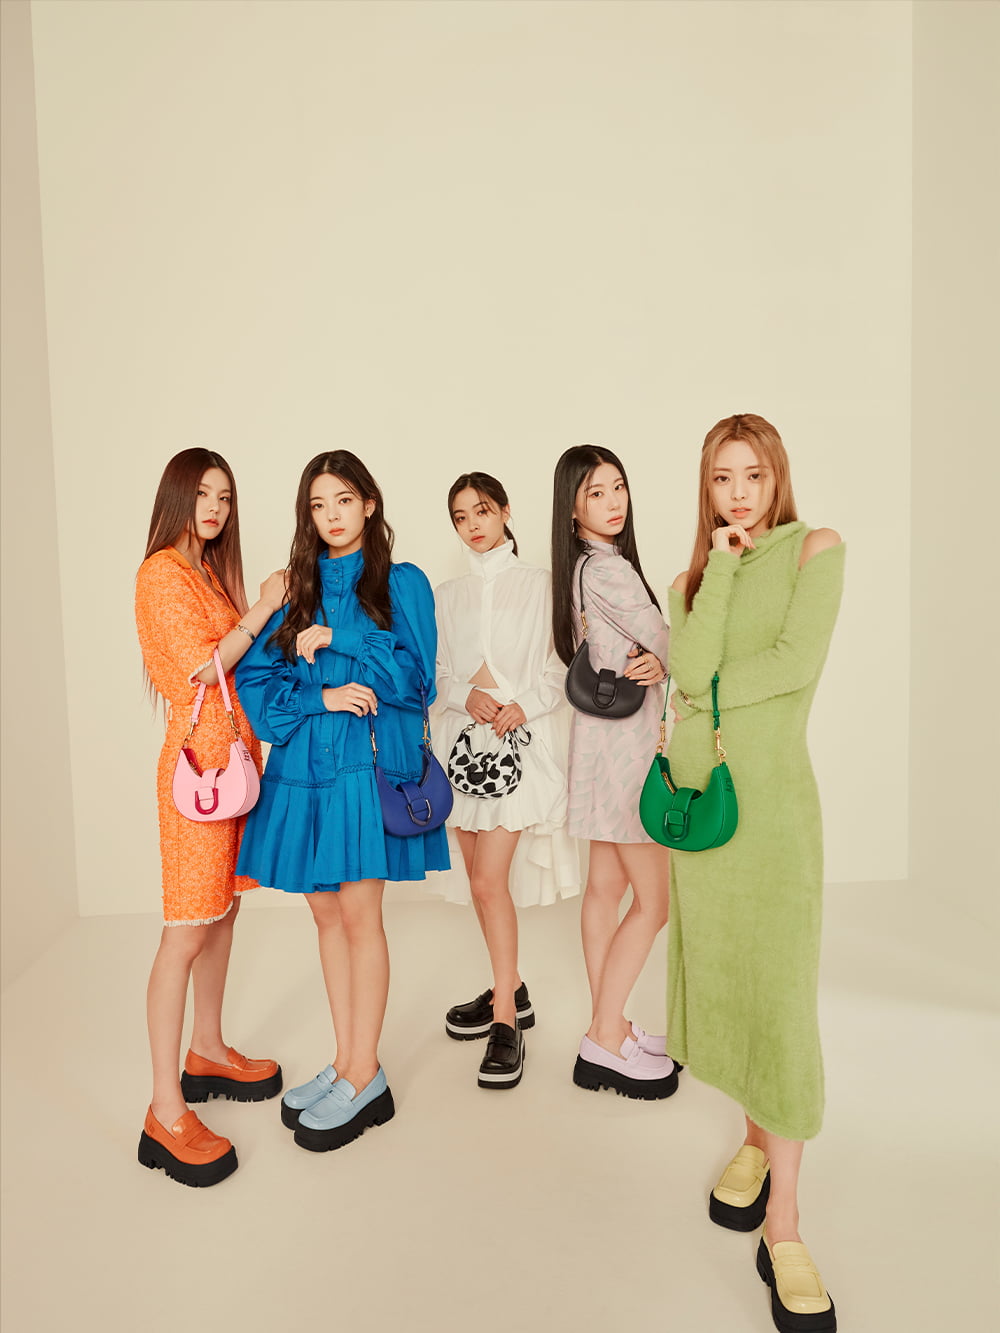 ITZY X CHARLES & KEITH: ITZ MINE cobalt, dark moss, chalk, pink, and green Gabine belted hobo bag and lilac, yellow, orange, light blue and black Rainier chunky platform penny loafers